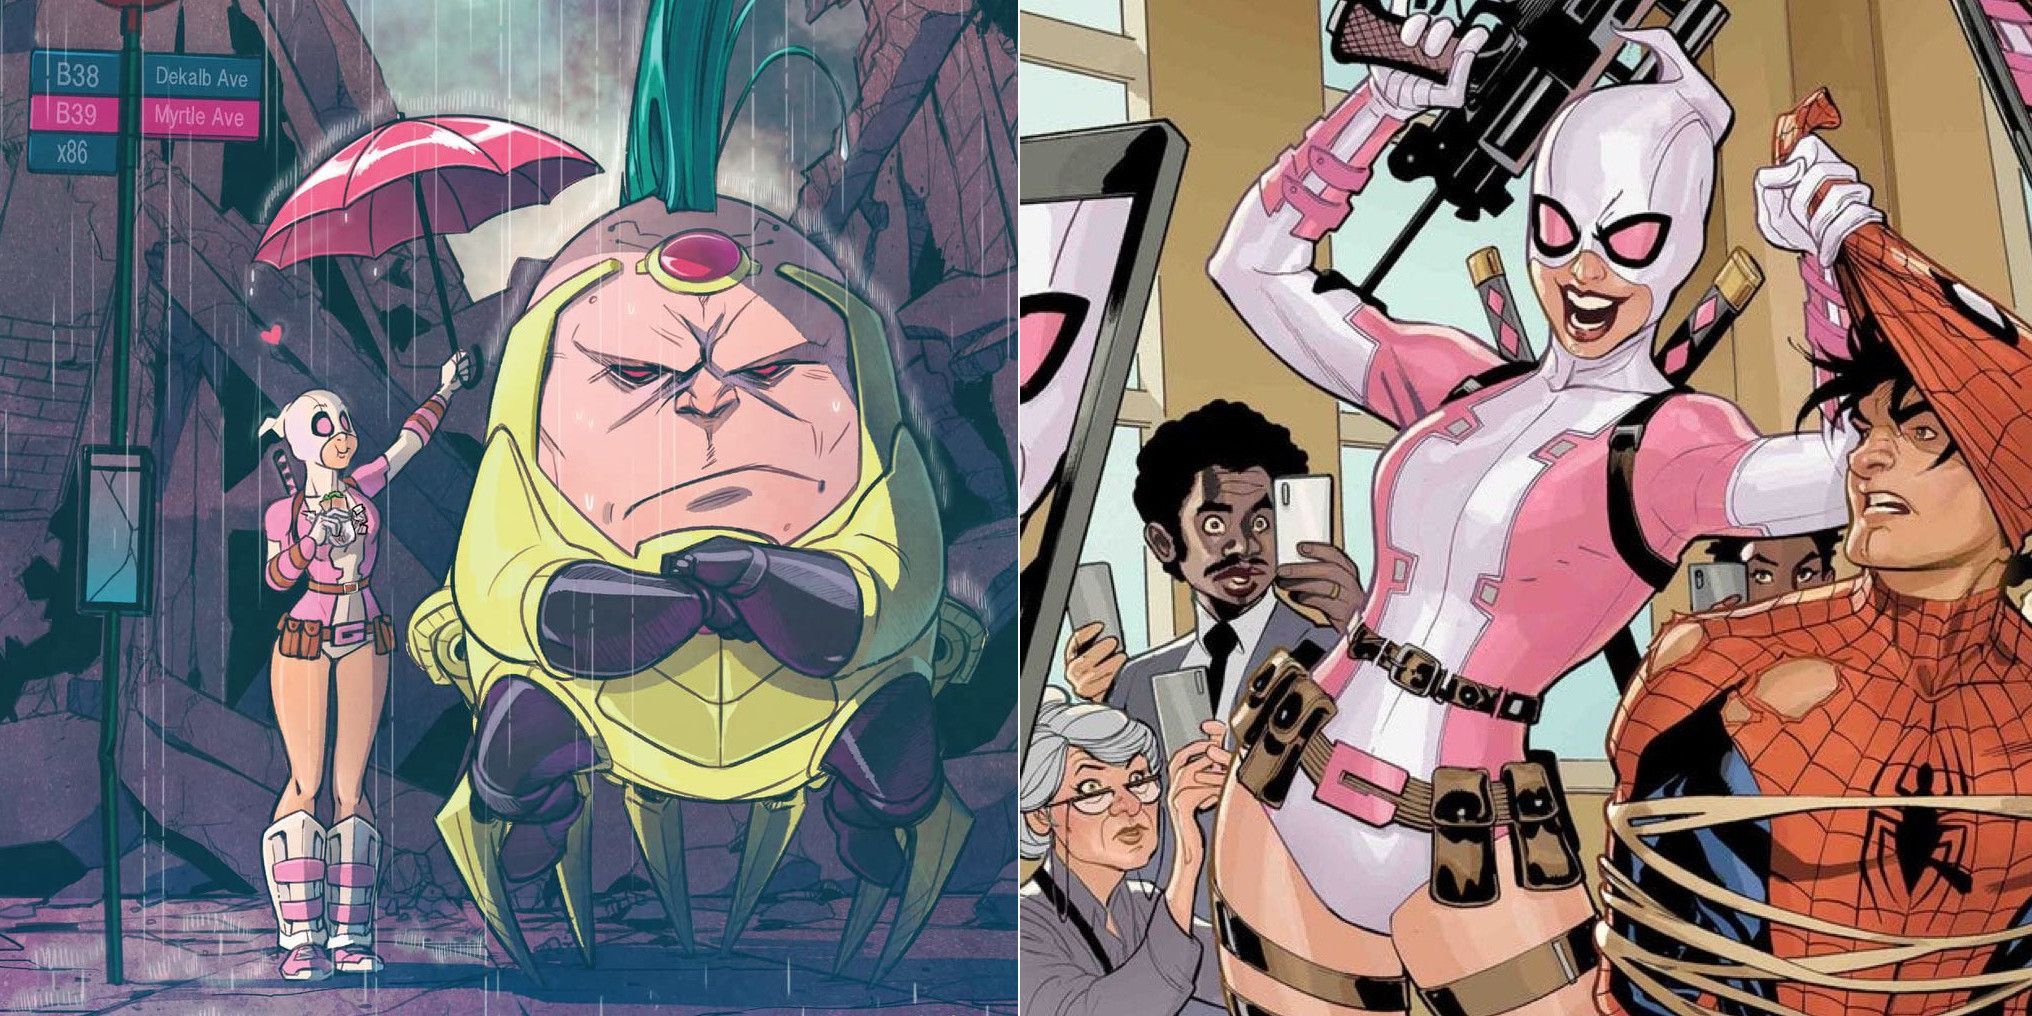 Privilegium fad lur Gwenpool: 10 Most Obscure References & Jokes She Made In The Comics